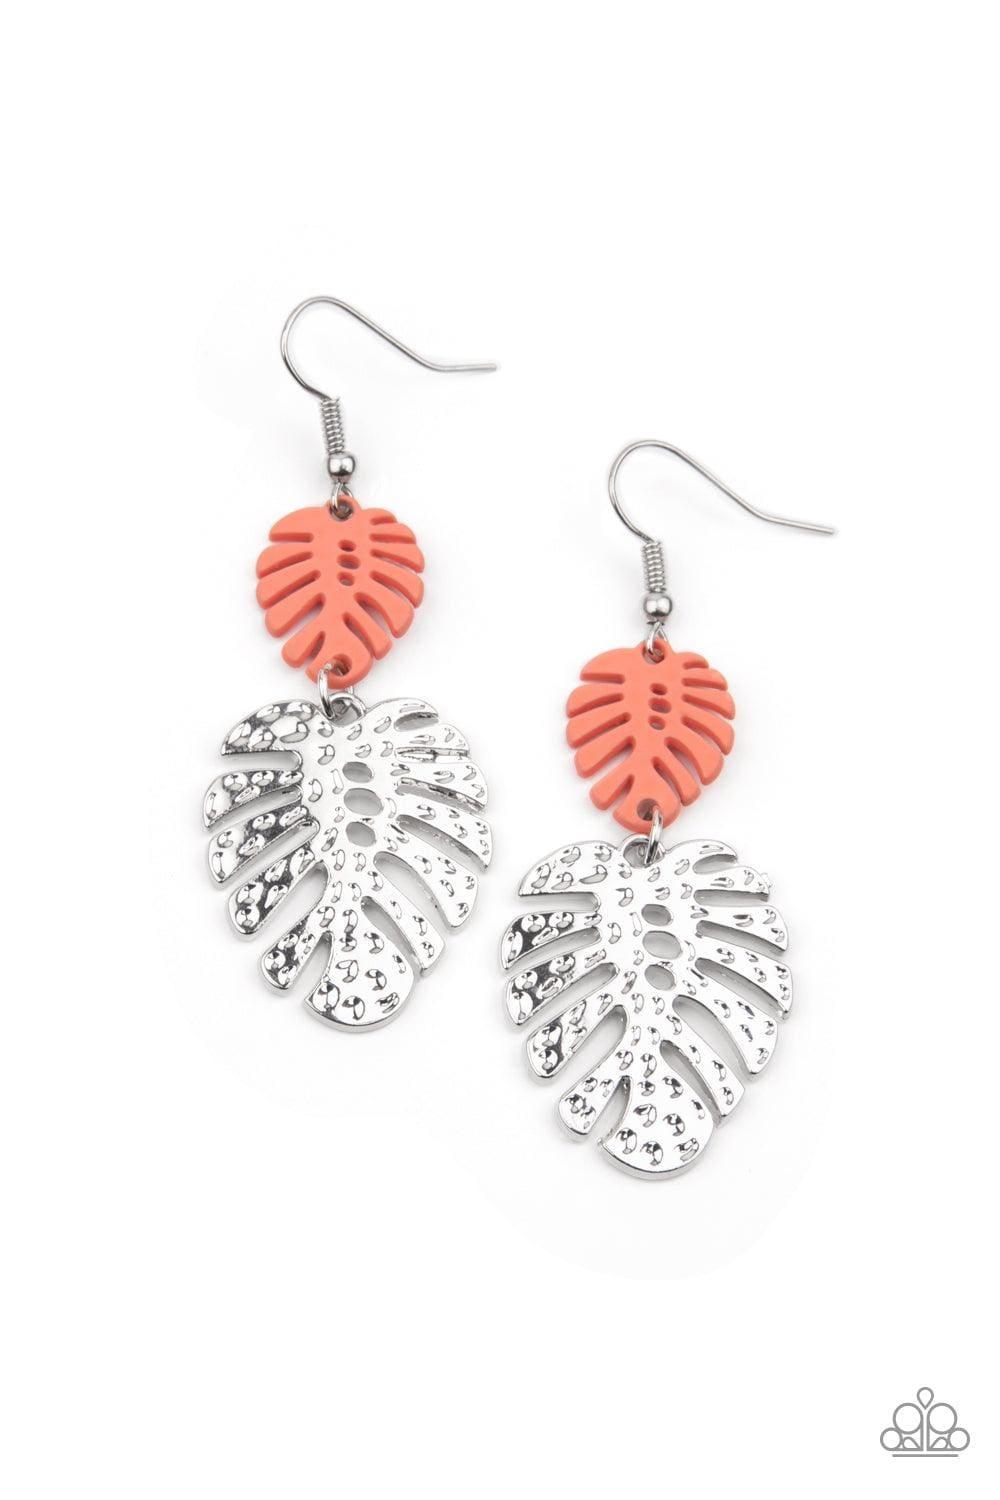 Paparazzi Accessories - Palm Tree Cabana - Orange Coral Earrings - Bling by JessieK